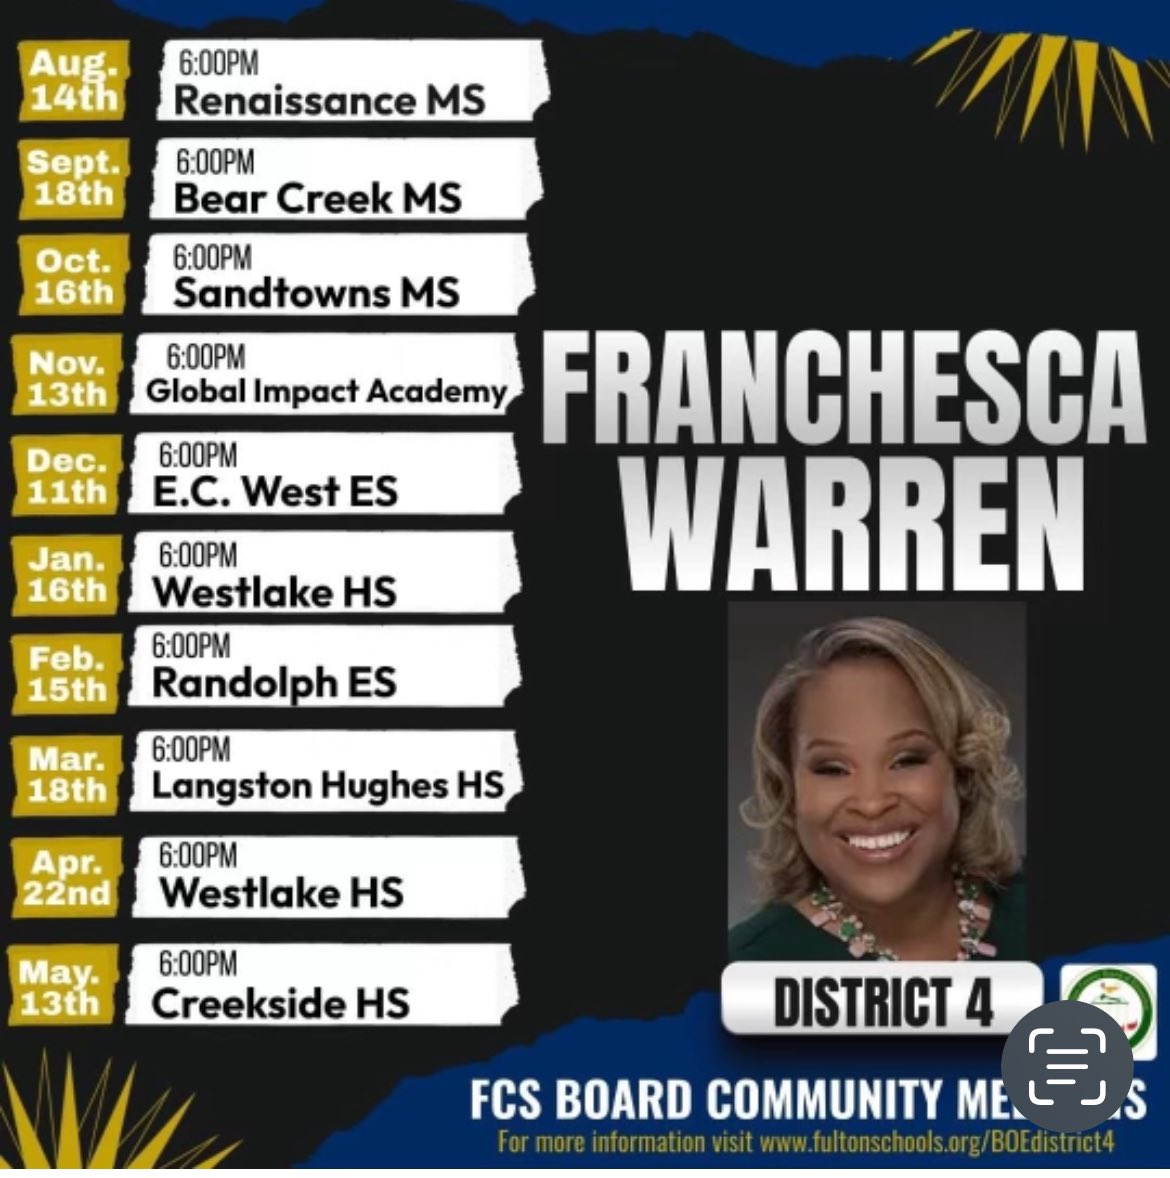 '📣 Calling all @COSFGA residents! Join us at @OneWestlake on April 22 at 6pm for an important community meeting hosted by @FultonCoSchools Board Member Mrs. Franchesca Warren. Come learn about the exciting direction of Fulton County Schools!